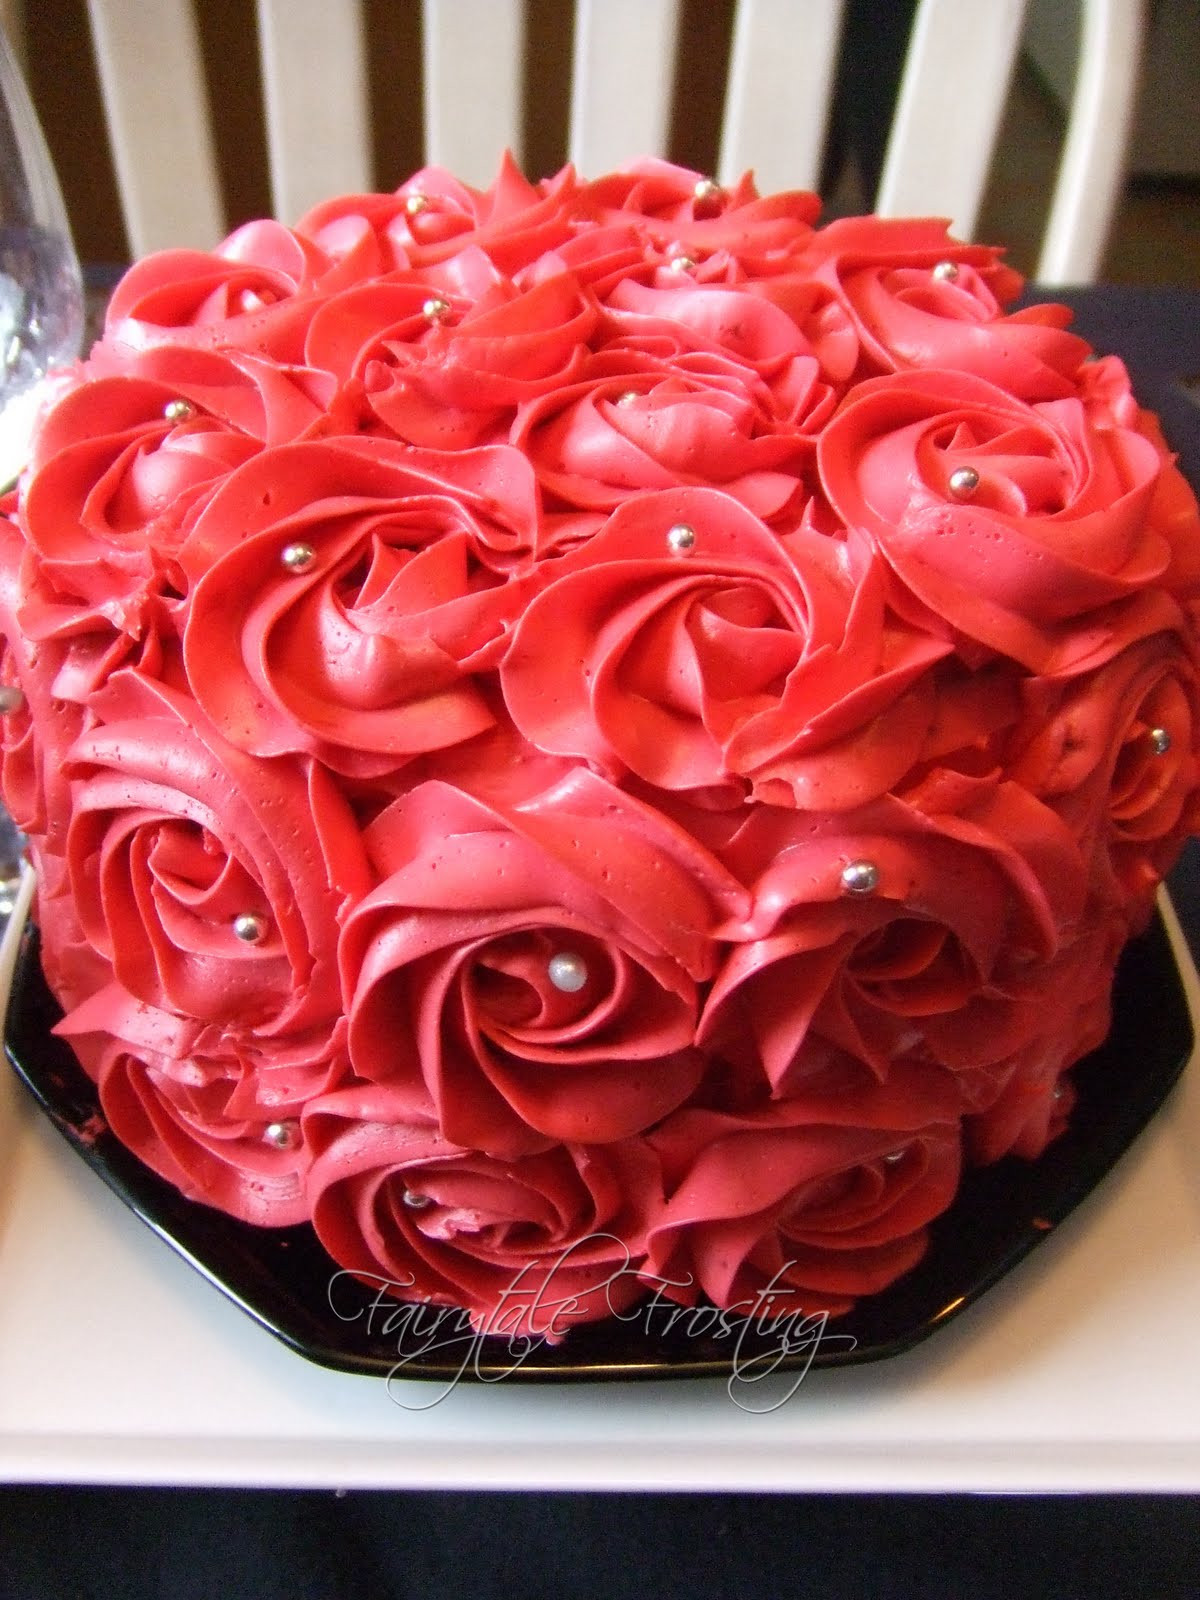 Rose Birthday Cake
 Fairytale Frosting Our Valentine s Table